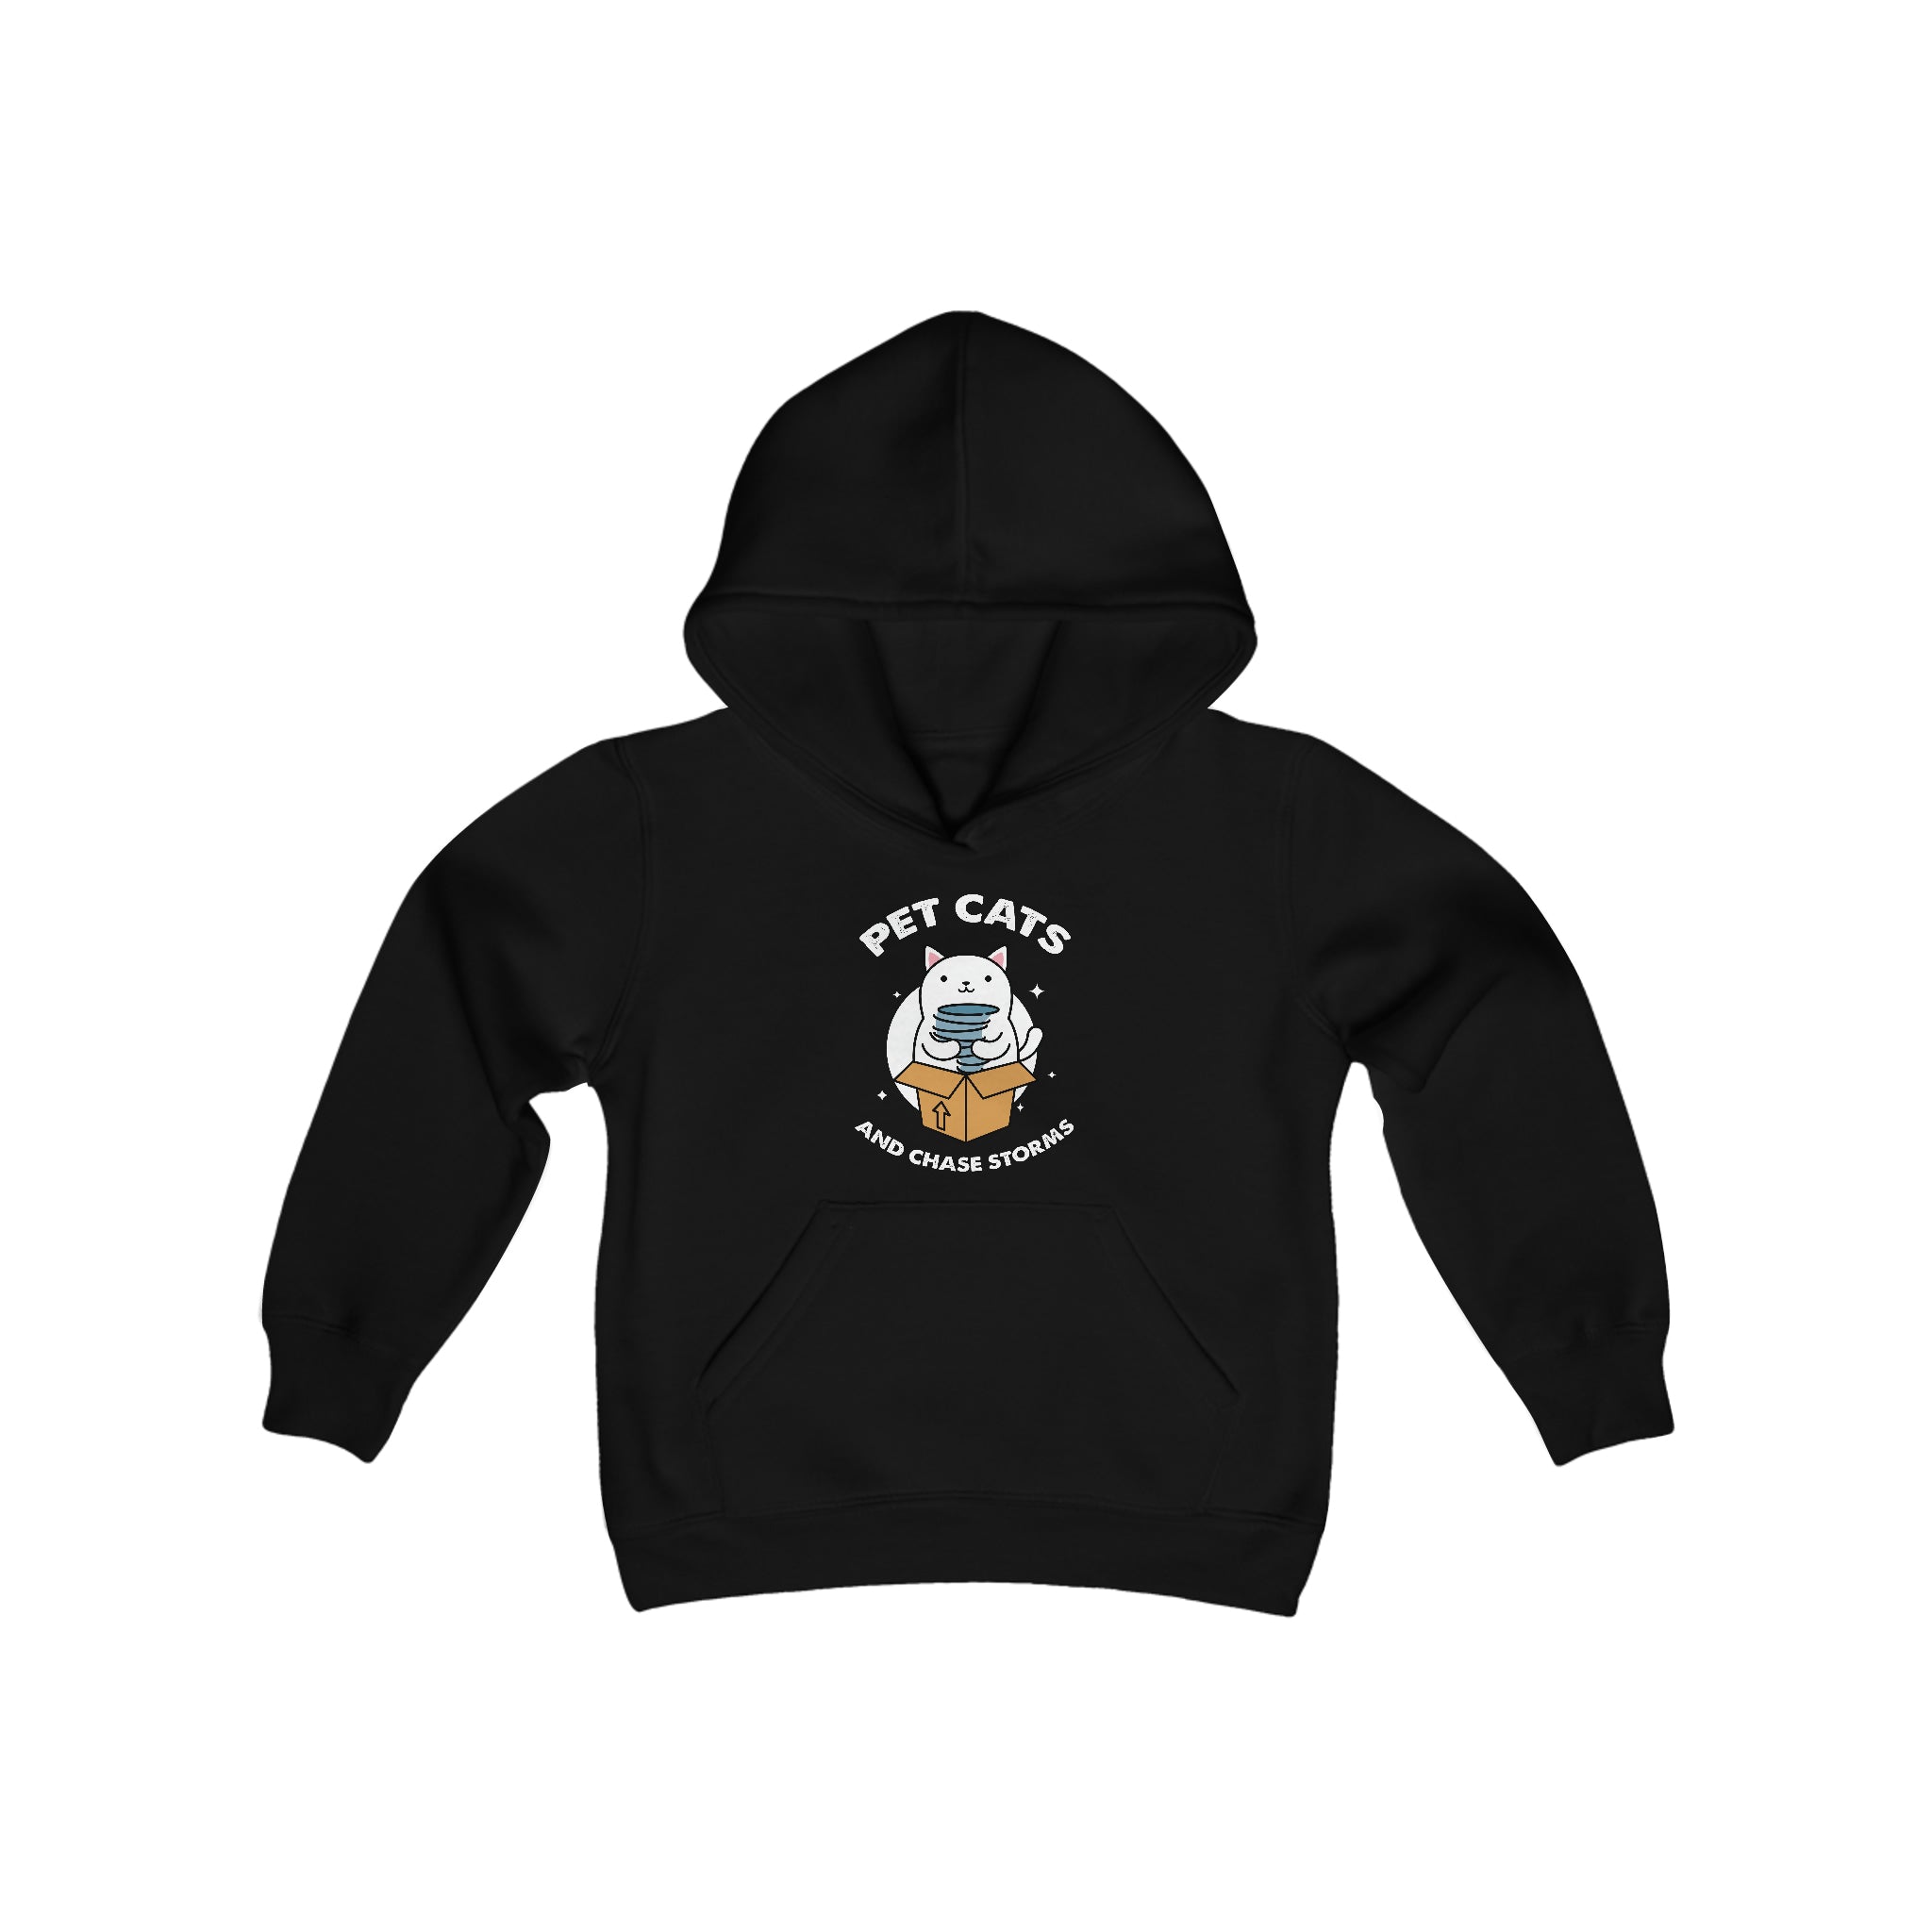 Pet Cats and Chase Storms Children's Hoodie 